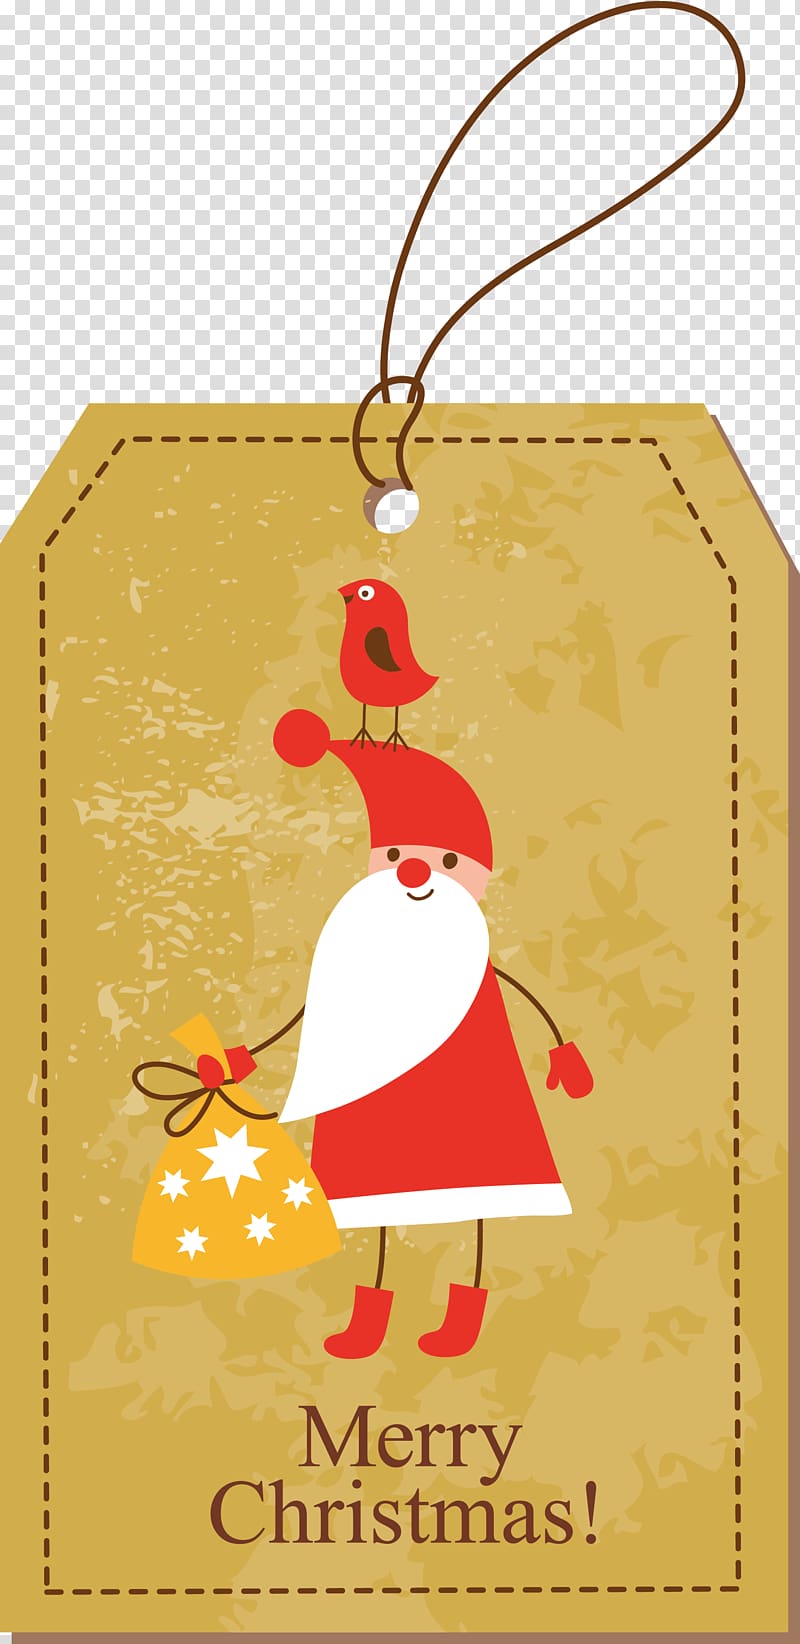 Christmas gift Christmas gift Santa Claus Christmas decoration, Christmas tags transparent background PNG clipart